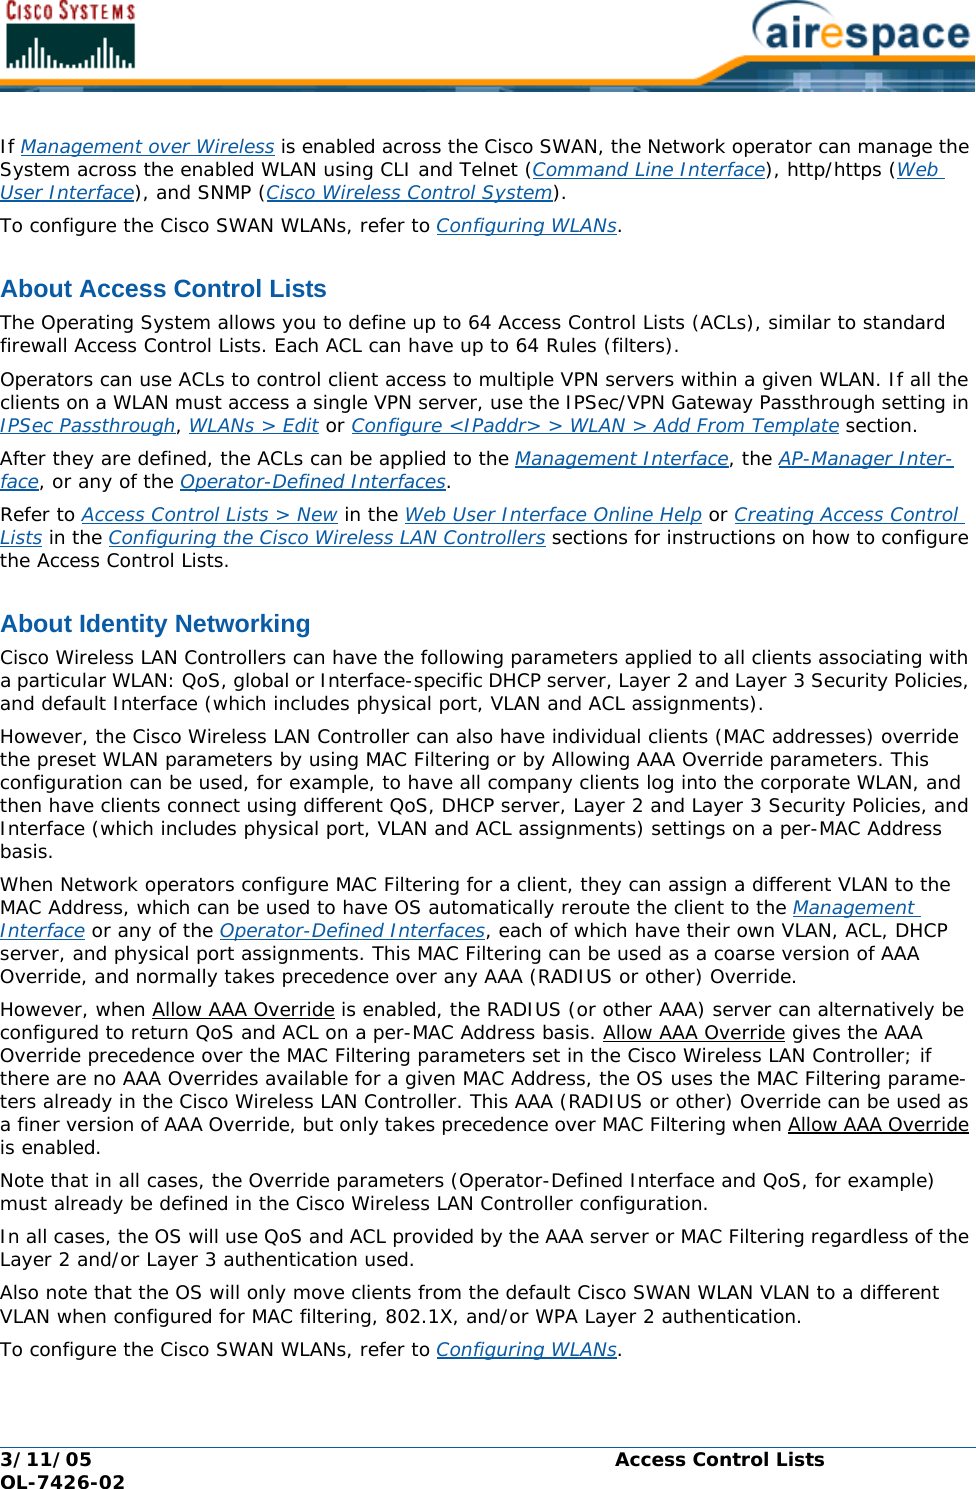 3/11/05 Access Control Lists  OL-7426-02If Management over Wireless is enabled across the Cisco SWAN, the Network operator can manage the System across the enabled WLAN using CLI and Telnet (Command Line Interface), http/https (Web User Interface), and SNMP (Cisco Wireless Control System).To configure the Cisco SWAN WLANs, refer to Configuring WLANs.About Access Control ListsAccess Control ListsThe Operating System allows you to define up to 64 Access Control Lists (ACLs), similar to standard firewall Access Control Lists. Each ACL can have up to 64 Rules (filters).Operators can use ACLs to control client access to multiple VPN servers within a given WLAN. If all the clients on a WLAN must access a single VPN server, use the IPSec/VPN Gateway Passthrough setting in IPSec Passthrough, WLANs &gt; Edit or Configure &lt;IPaddr&gt; &gt; WLAN &gt; Add From Template section.After they are defined, the ACLs can be applied to the Management Interface, the AP-Manager Inter-face, or any of the Operator-Defined Interfaces.Refer to Access Control Lists &gt; New in the Web User Interface Online Help or Creating Access Control Lists in the Configuring the Cisco Wireless LAN Controllers sections for instructions on how to configure the Access Control Lists.About Identity NetworkingIdentity NetworkingCisco Wireless LAN Controllers can have the following parameters applied to all clients associating with a particular WLAN: QoS, global or Interface-specific DHCP server, Layer 2 and Layer 3 Security Policies, and default Interface (which includes physical port, VLAN and ACL assignments).However, the Cisco Wireless LAN Controller can also have individual clients (MAC addresses) override the preset WLAN parameters by using MAC Filtering or by Allowing AAA Override parameters. This configuration can be used, for example, to have all company clients log into the corporate WLAN, and then have clients connect using different QoS, DHCP server, Layer 2 and Layer 3 Security Policies, and Interface (which includes physical port, VLAN and ACL assignments) settings on a per-MAC Address basis.When Network operators configure MAC Filtering for a client, they can assign a different VLAN to the MAC Address, which can be used to have OS automatically reroute the client to the Management Interface or any of the Operator-Defined Interfaces, each of which have their own VLAN, ACL, DHCP server, and physical port assignments. This MAC Filtering can be used as a coarse version of AAA Override, and normally takes precedence over any AAA (RADIUS or other) Override.However, when Allow AAA Override is enabled, the RADIUS (or other AAA) server can alternatively be configured to return QoS and ACL on a per-MAC Address basis. Allow AAA Override gives the AAA Override precedence over the MAC Filtering parameters set in the Cisco Wireless LAN Controller; if there are no AAA Overrides available for a given MAC Address, the OS uses the MAC Filtering parame-ters already in the Cisco Wireless LAN Controller. This AAA (RADIUS or other) Override can be used as a finer version of AAA Override, but only takes precedence over MAC Filtering when Allow AAA Override is enabled.Note that in all cases, the Override parameters (Operator-Defined Interface and QoS, for example) must already be defined in the Cisco Wireless LAN Controller configuration.In all cases, the OS will use QoS and ACL provided by the AAA server or MAC Filtering regardless of the Layer 2 and/or Layer 3 authentication used.Also note that the OS will only move clients from the default Cisco SWAN WLAN VLAN to a different VLAN when configured for MAC filtering, 802.1X, and/or WPA Layer 2 authentication. To configure the Cisco SWAN WLANs, refer to Configuring WLANs.